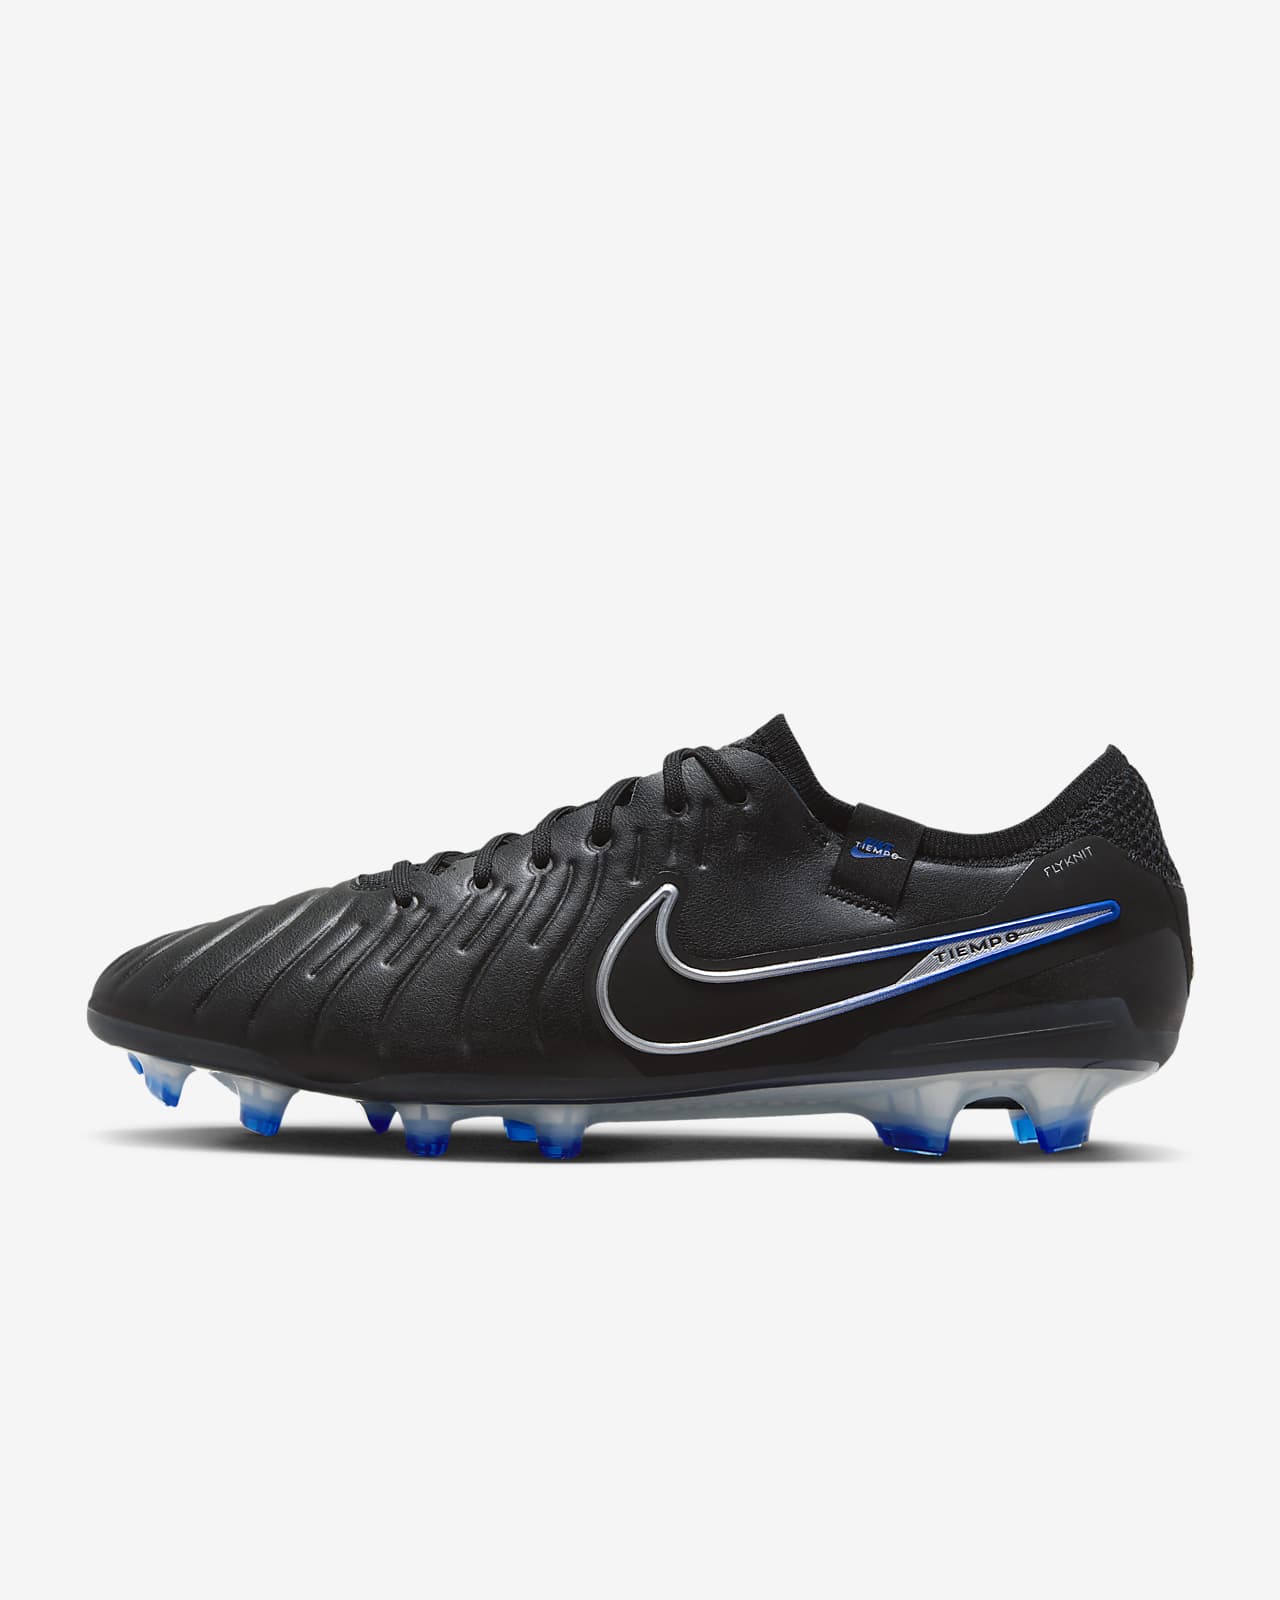 Nike Tiempo Legend 10 Elite Firm-Ground Low-Top Soccer Cleats